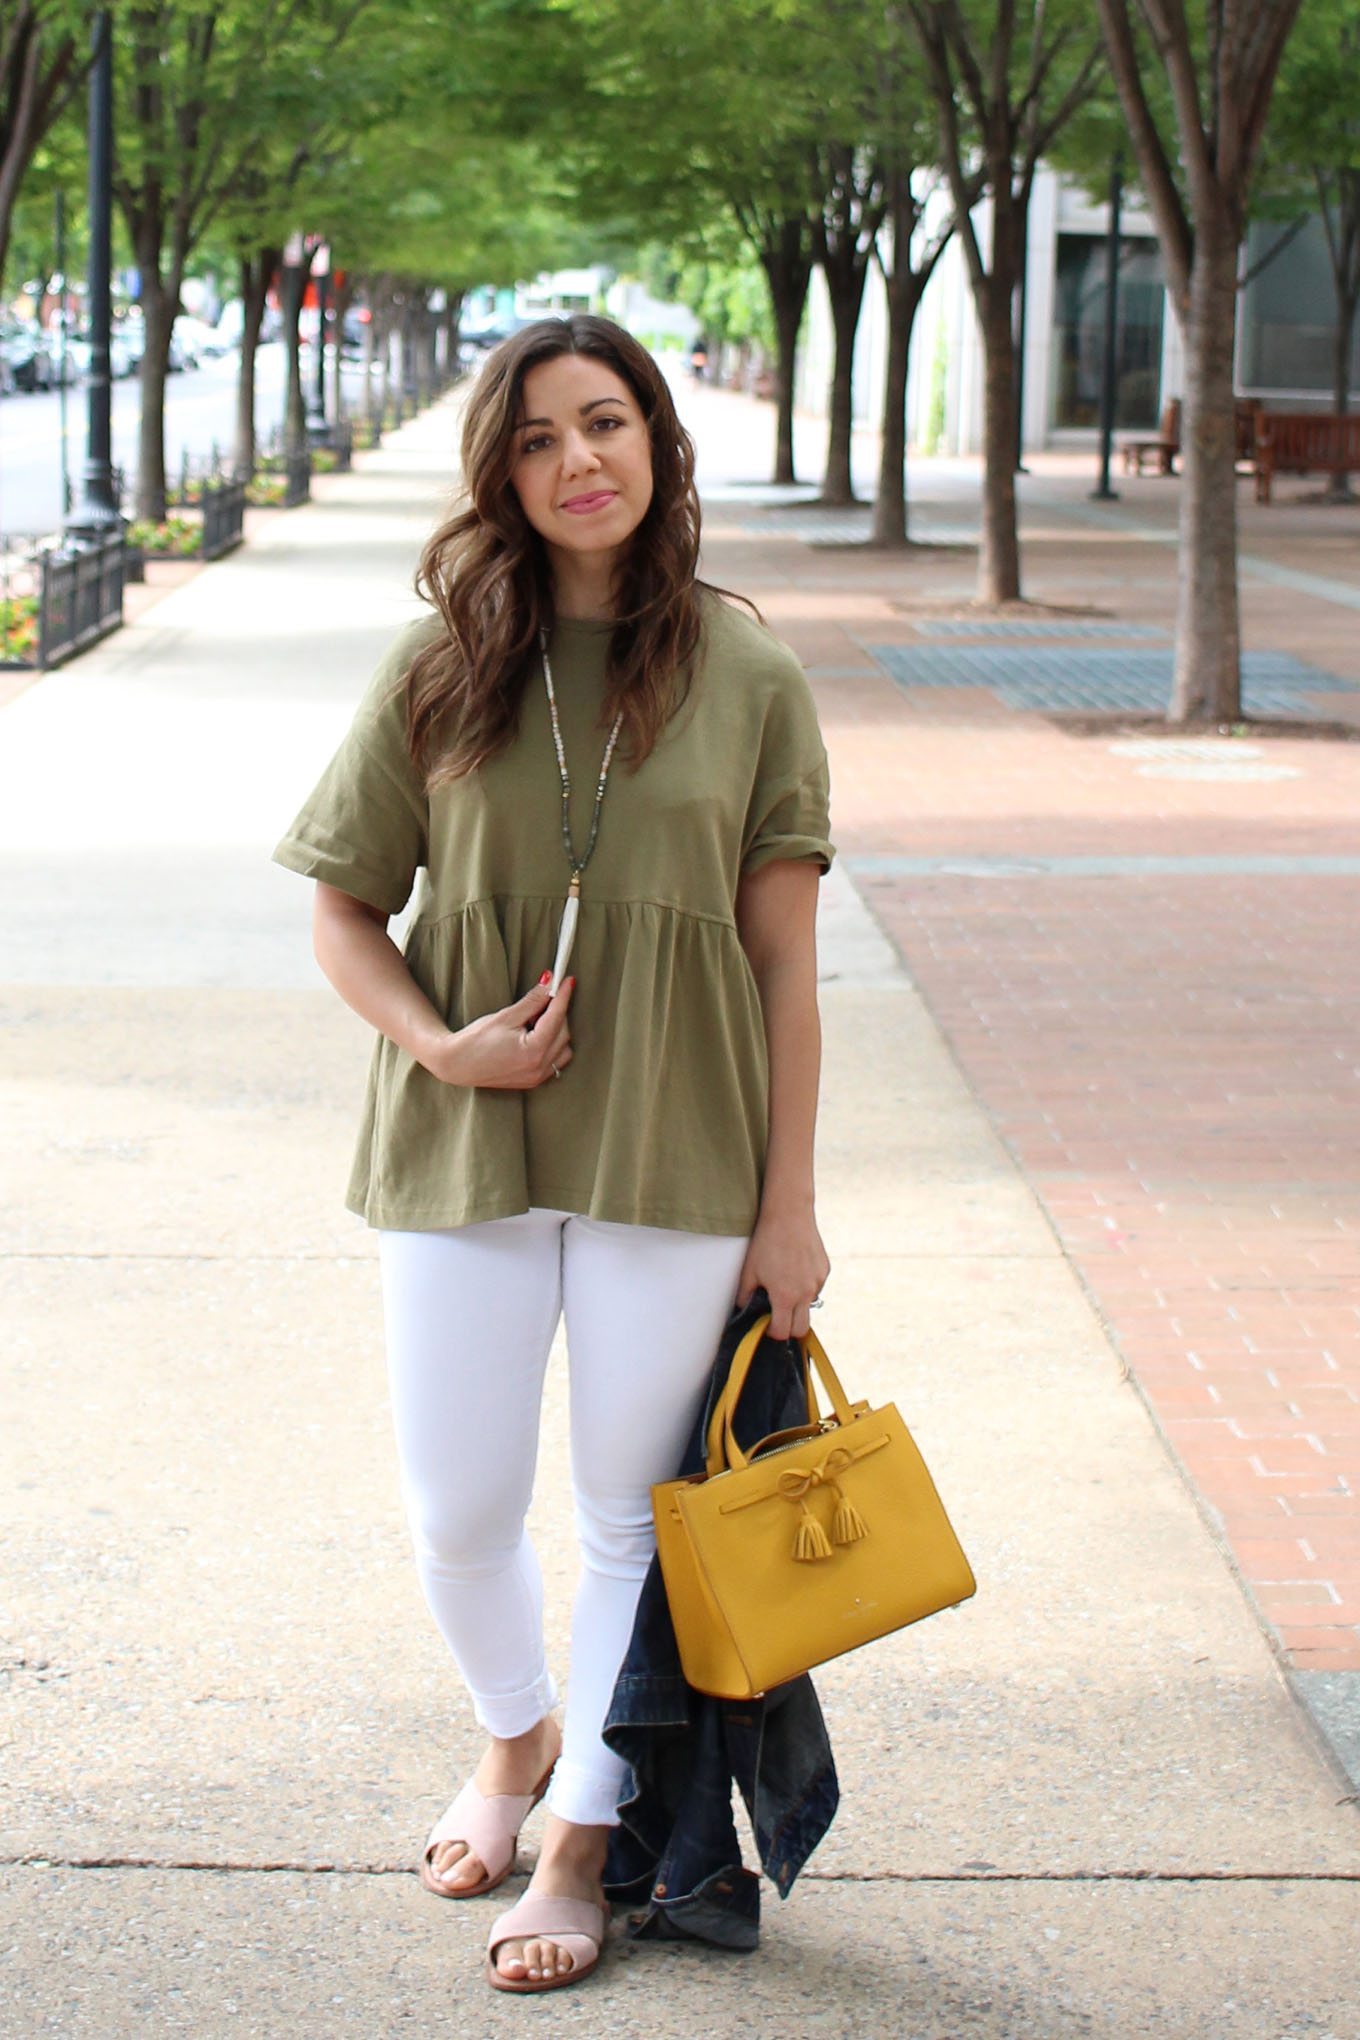 Lifestyle Blogger Roxanne of Glass of Glam wearing an army green peplum top, white denim, kate spade bag, and pink slides